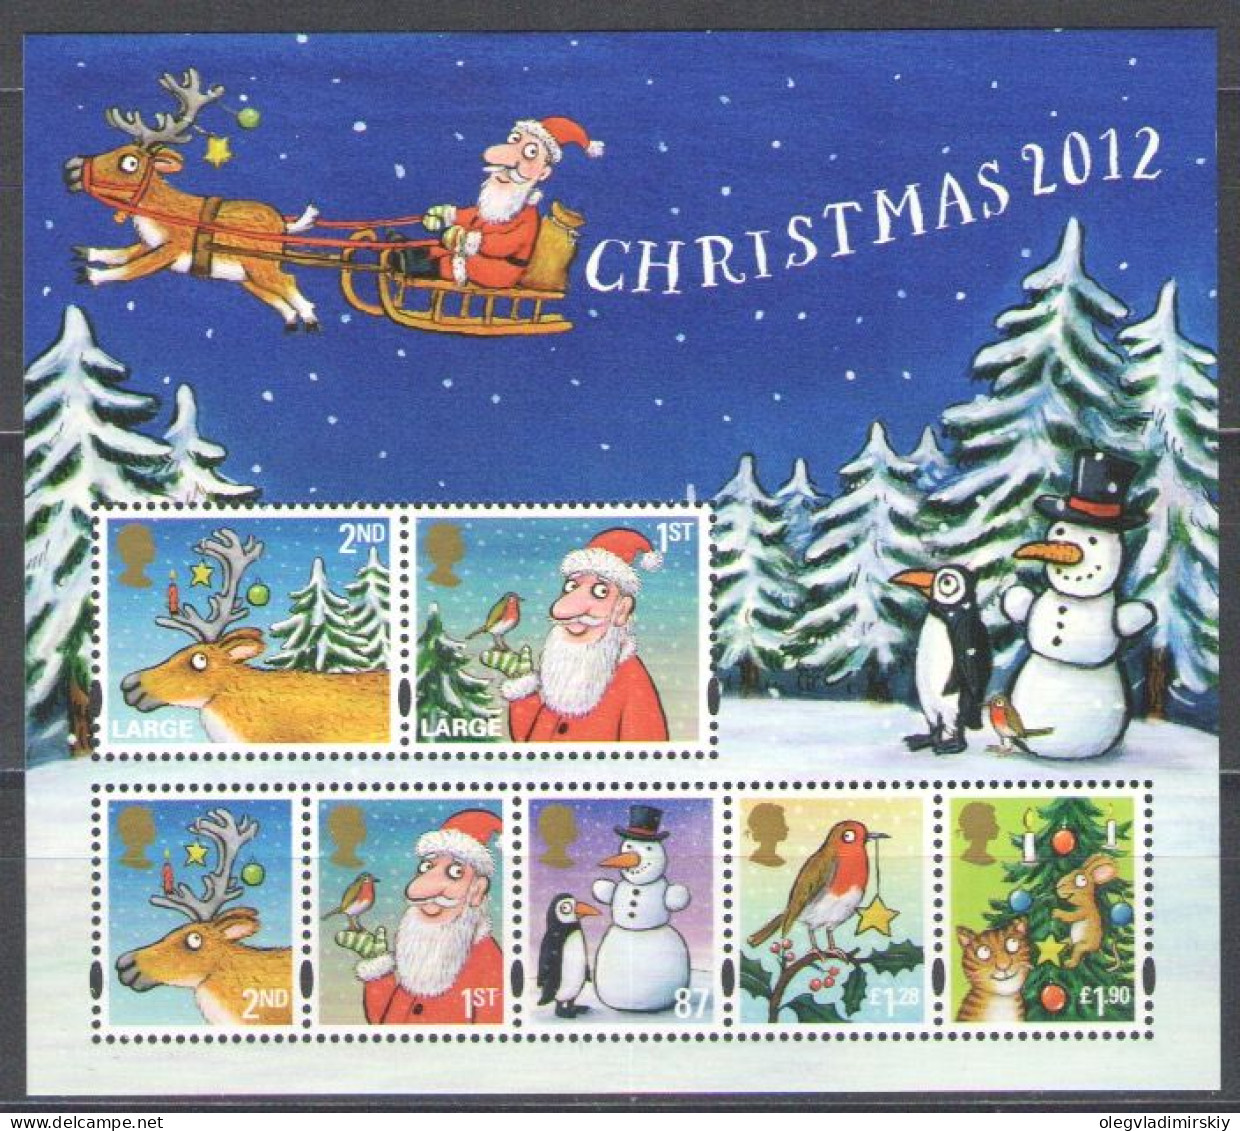 Great Britain United Kingdom 2012 Christmas Set Of 7 Classic Stamps In Block MNH - Natale